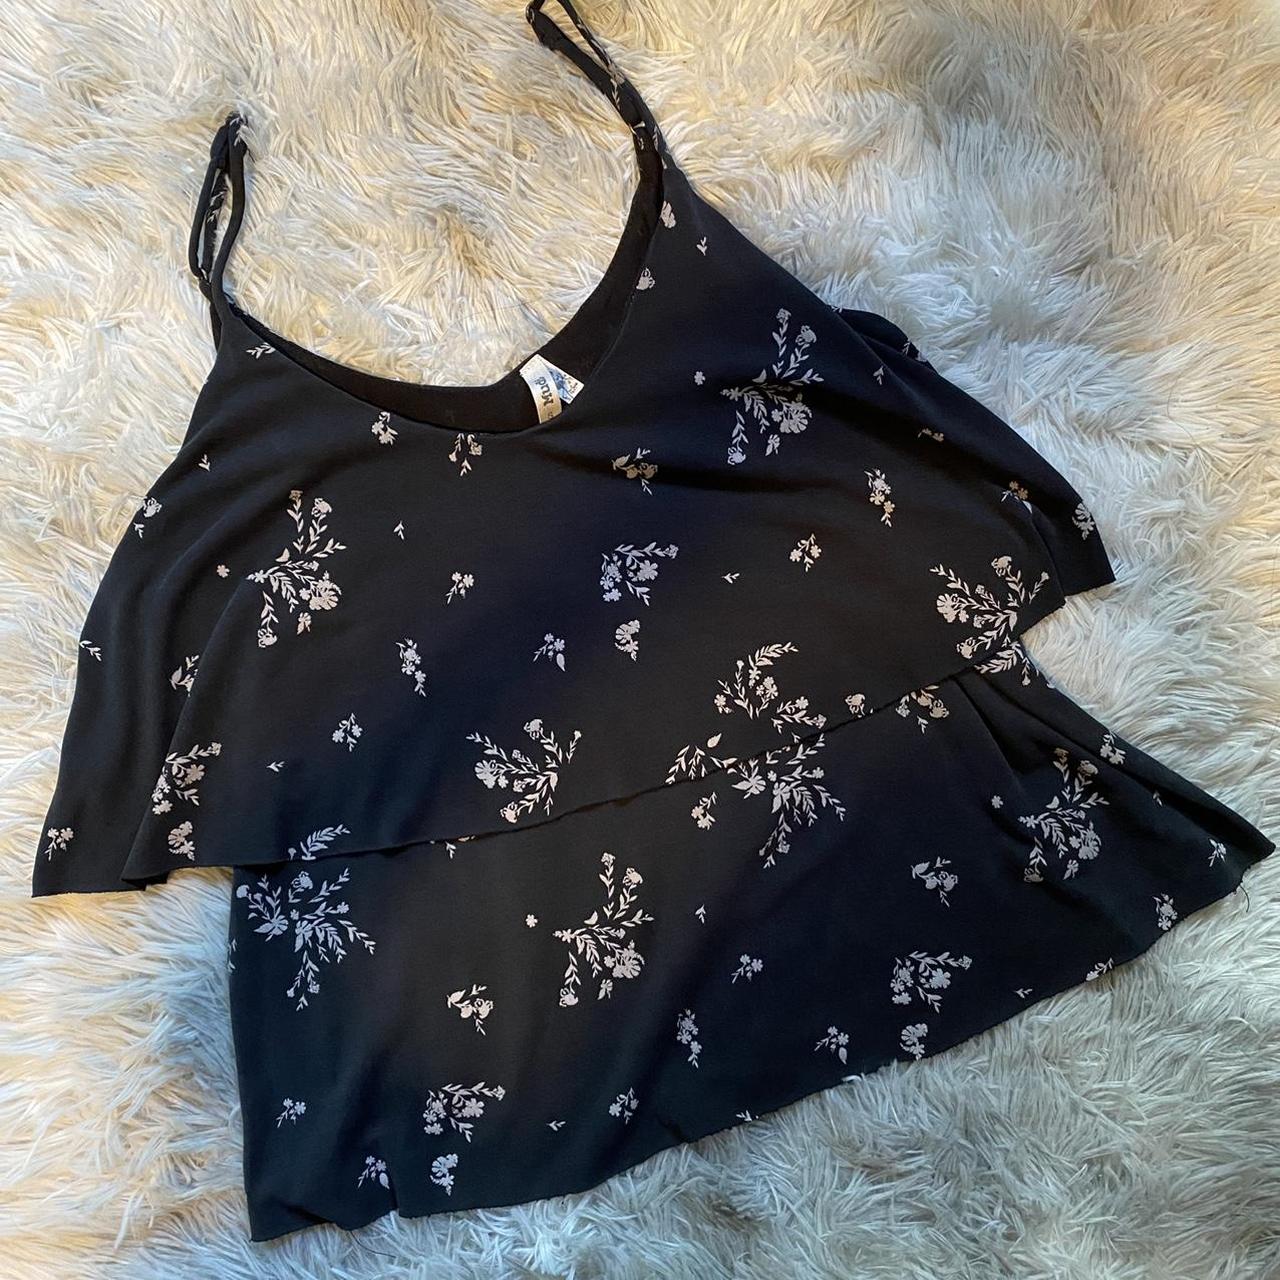 Product Image 3 - Black floral cami top
Has two